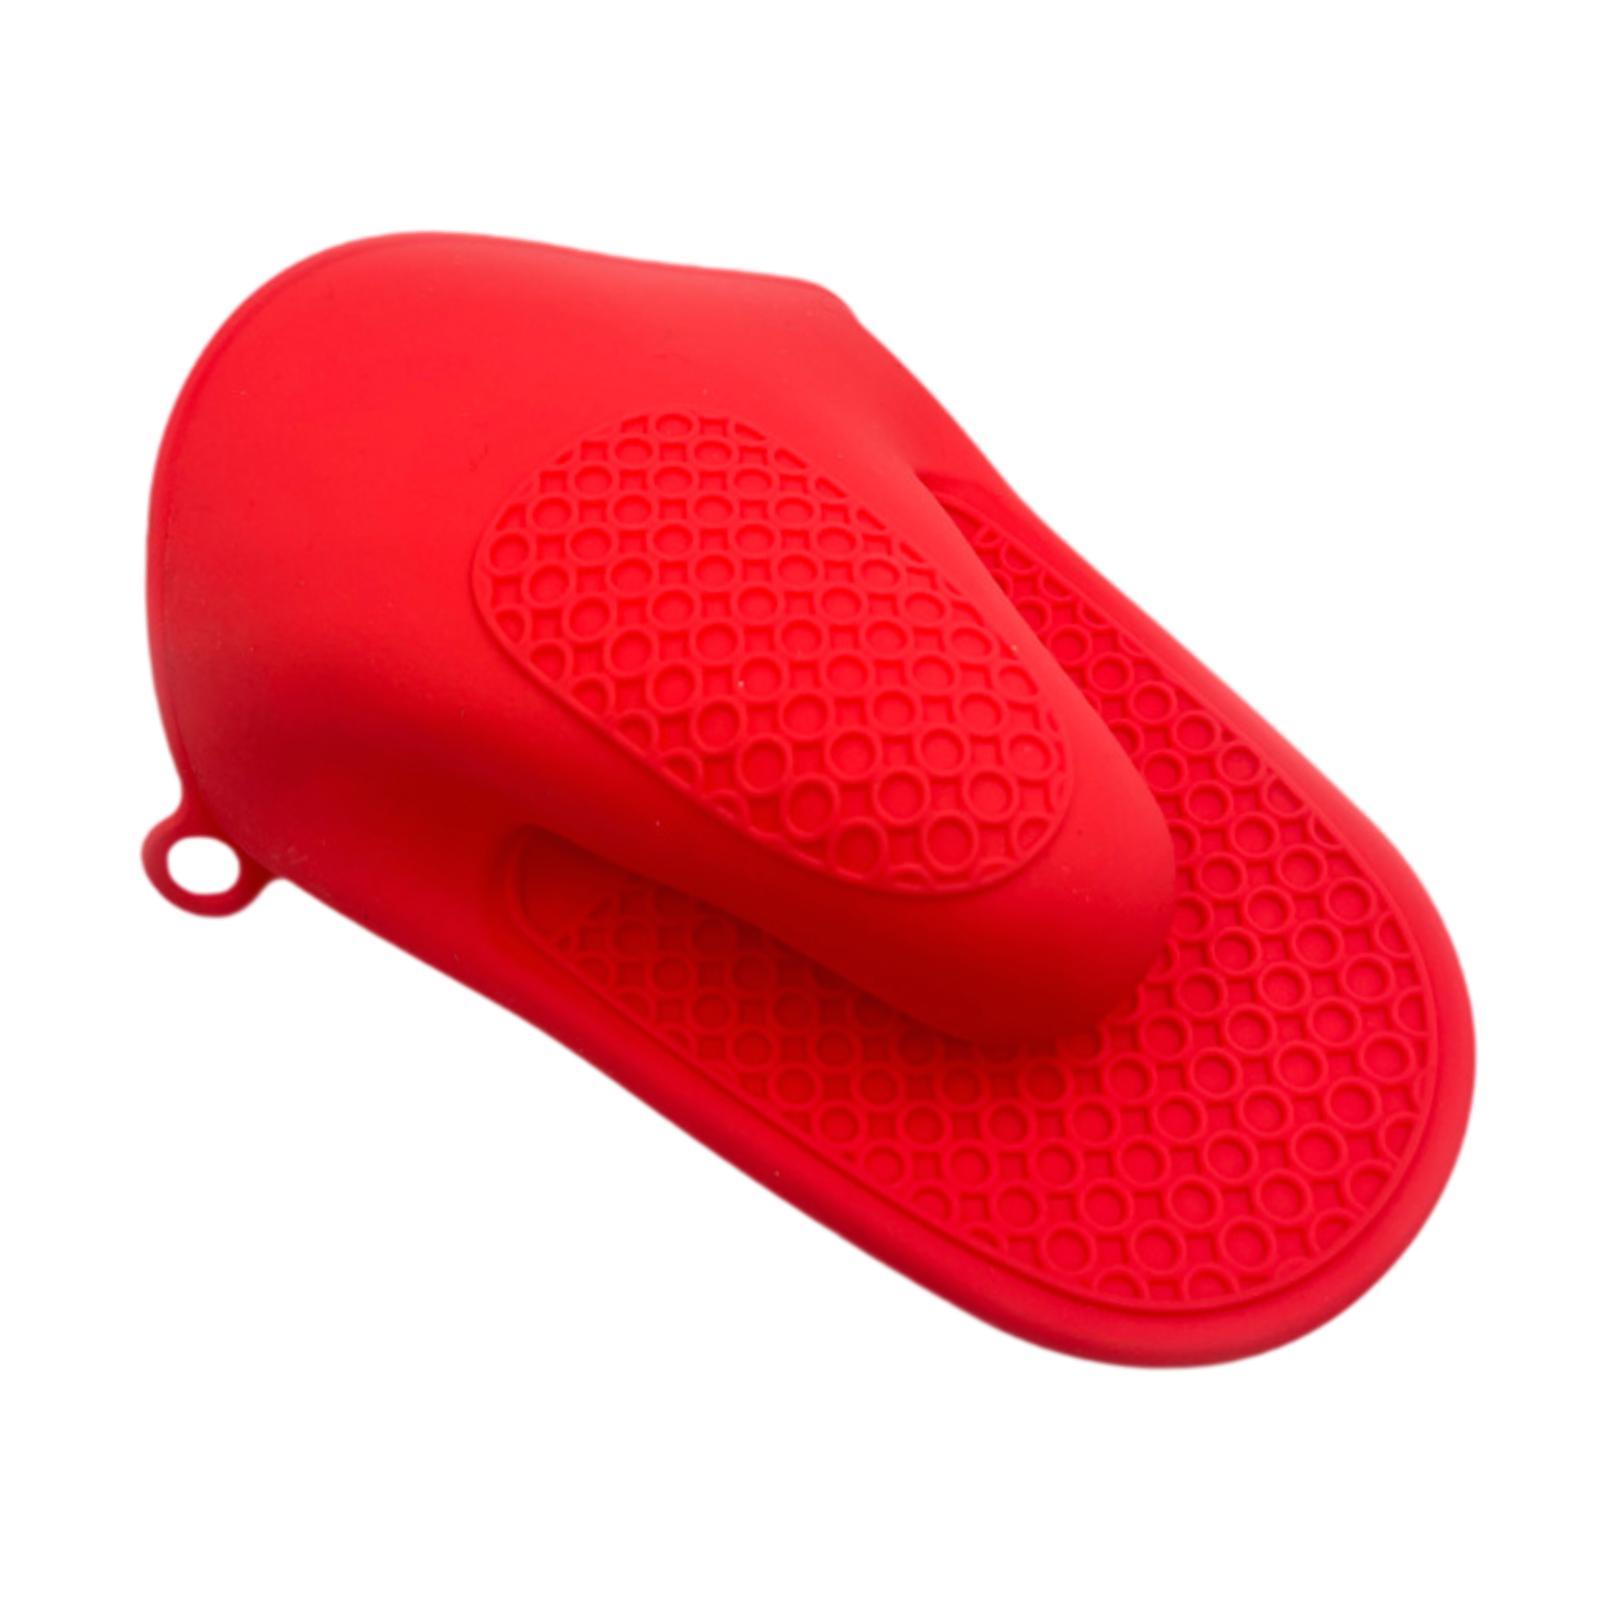 Silicone Oven Mitts Hanging Good Grip Pot Holders for Barbecue Baking Camping red